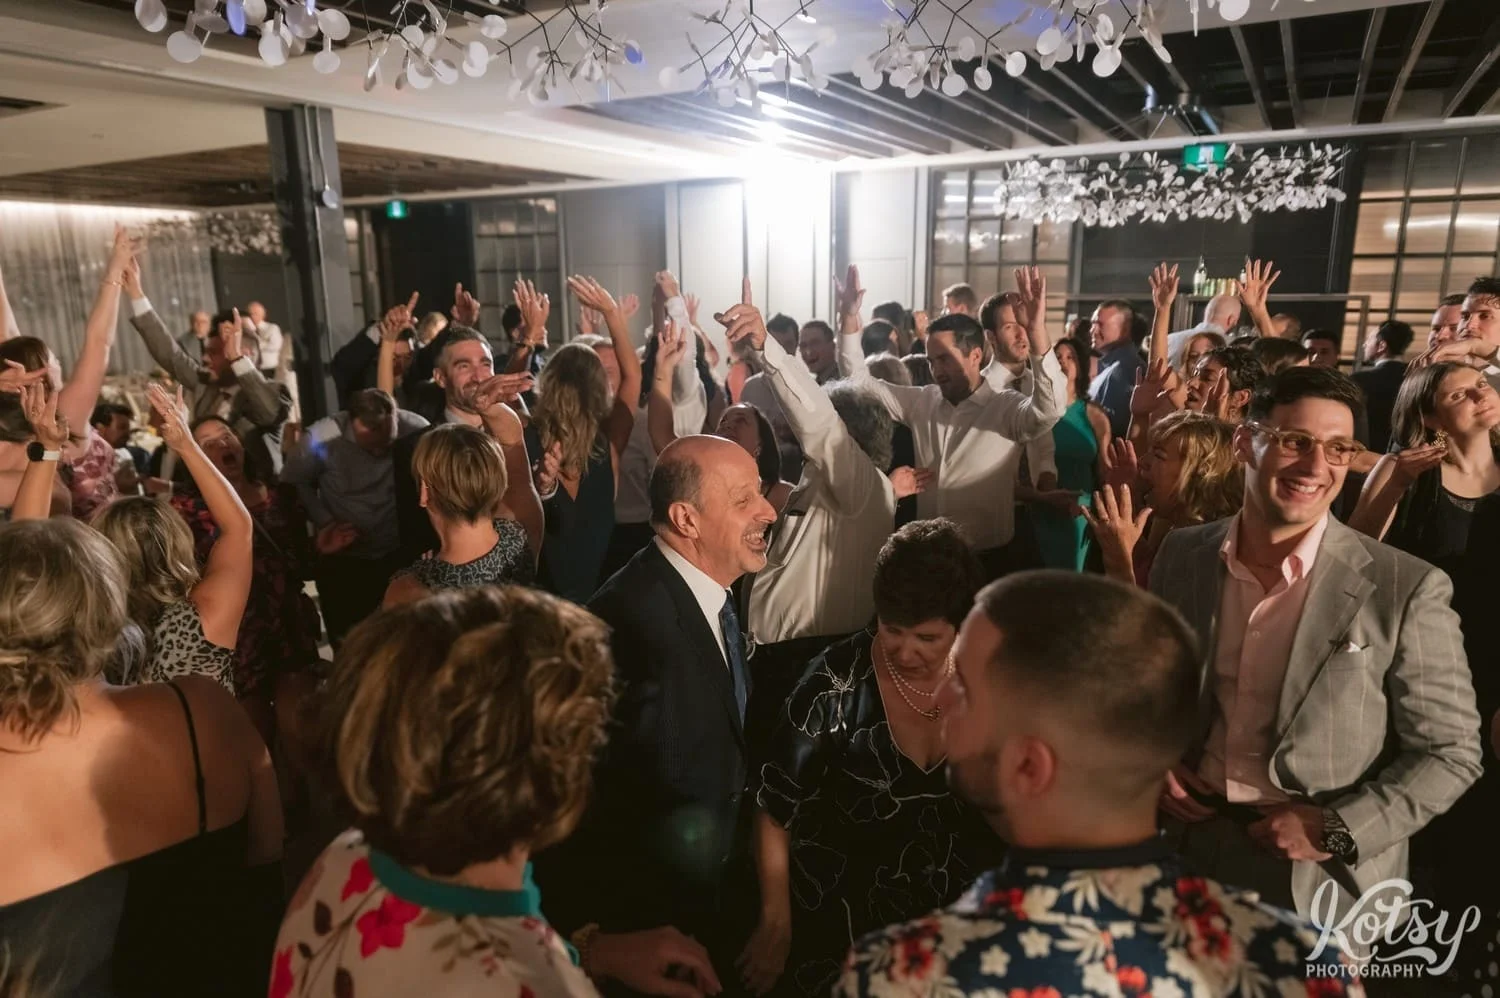 A room full of people raise their hands while dancing at a Village Loft wedding reception in Toronto, Canada